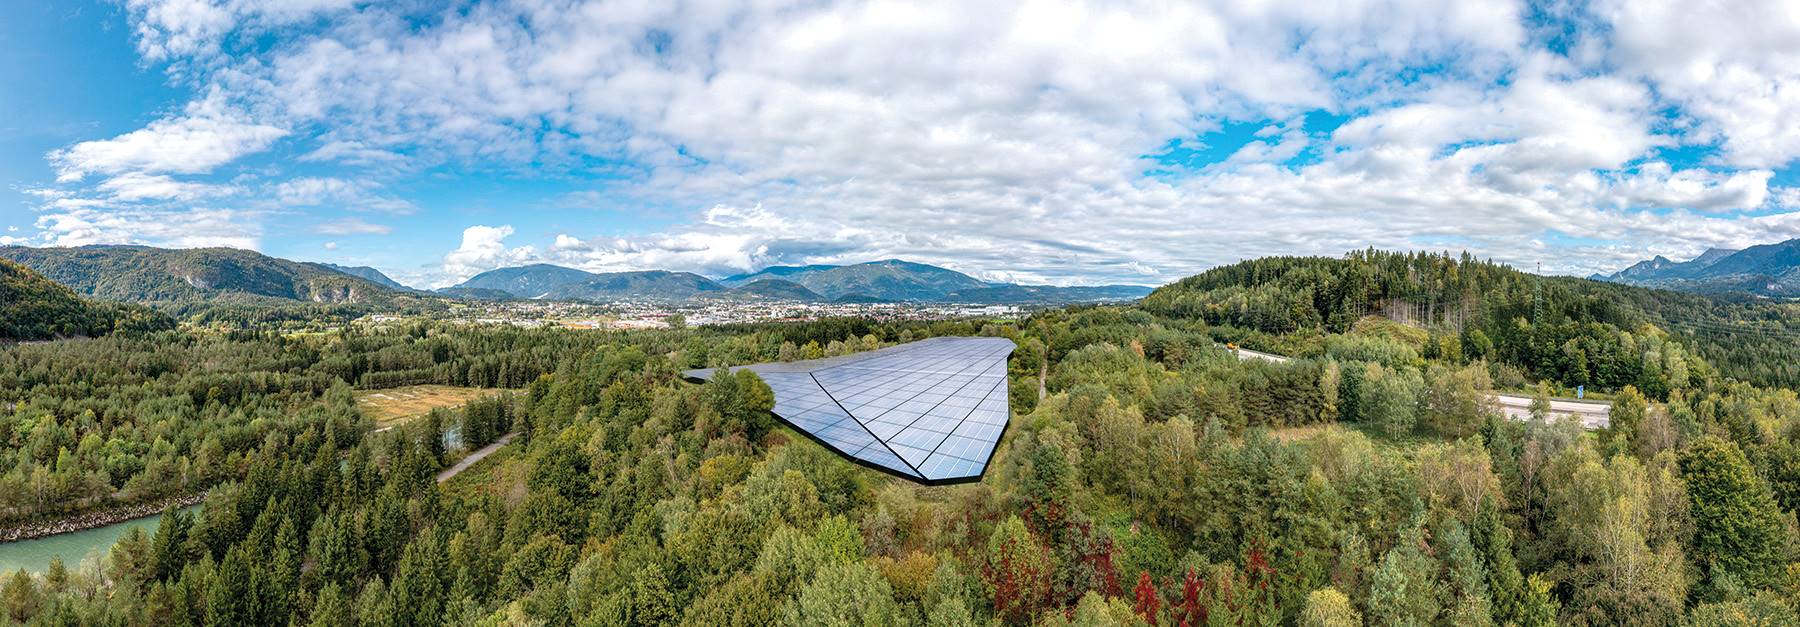 Panorama photo of a photovoltaic plant